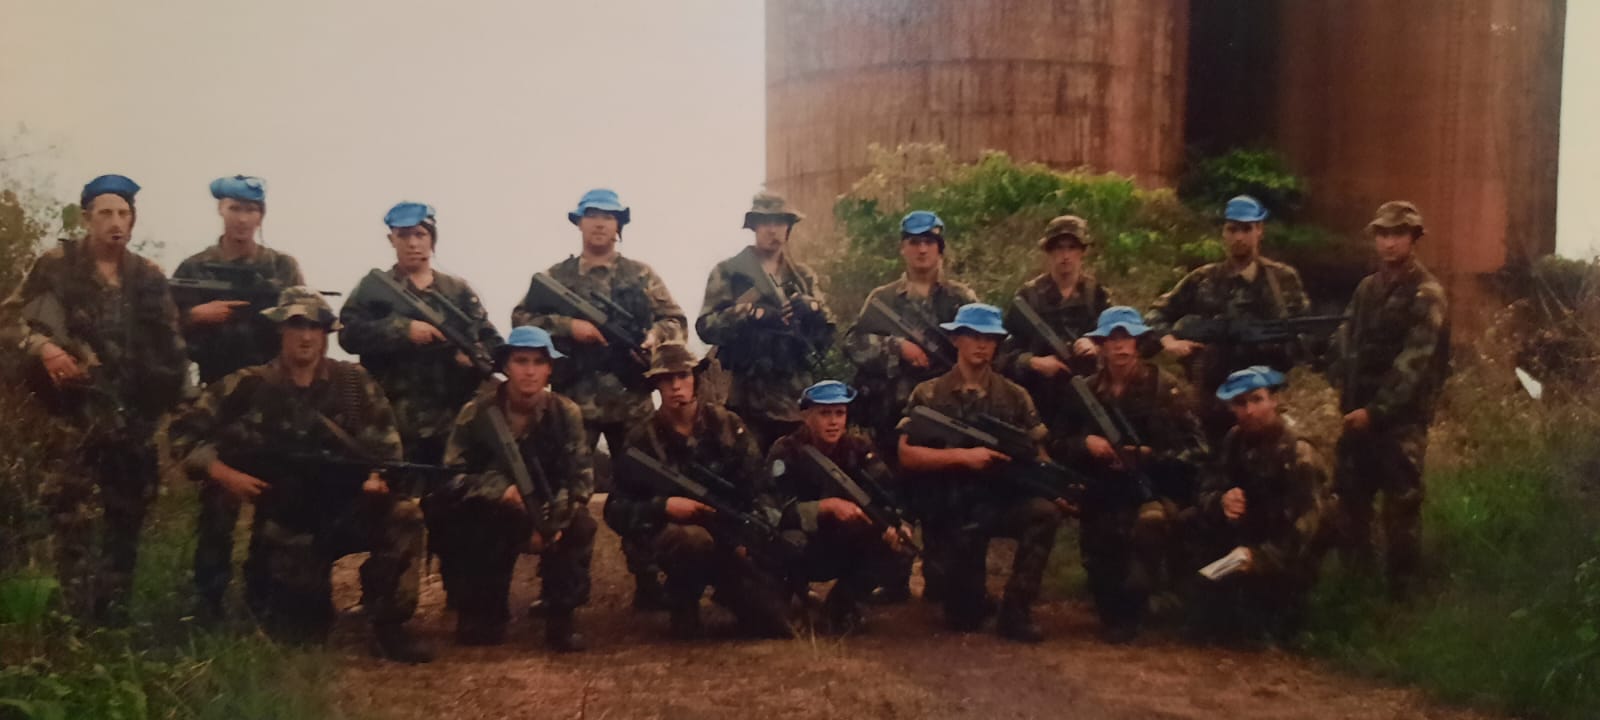 Mark Keely with his squad while on tour with the Defence forces.